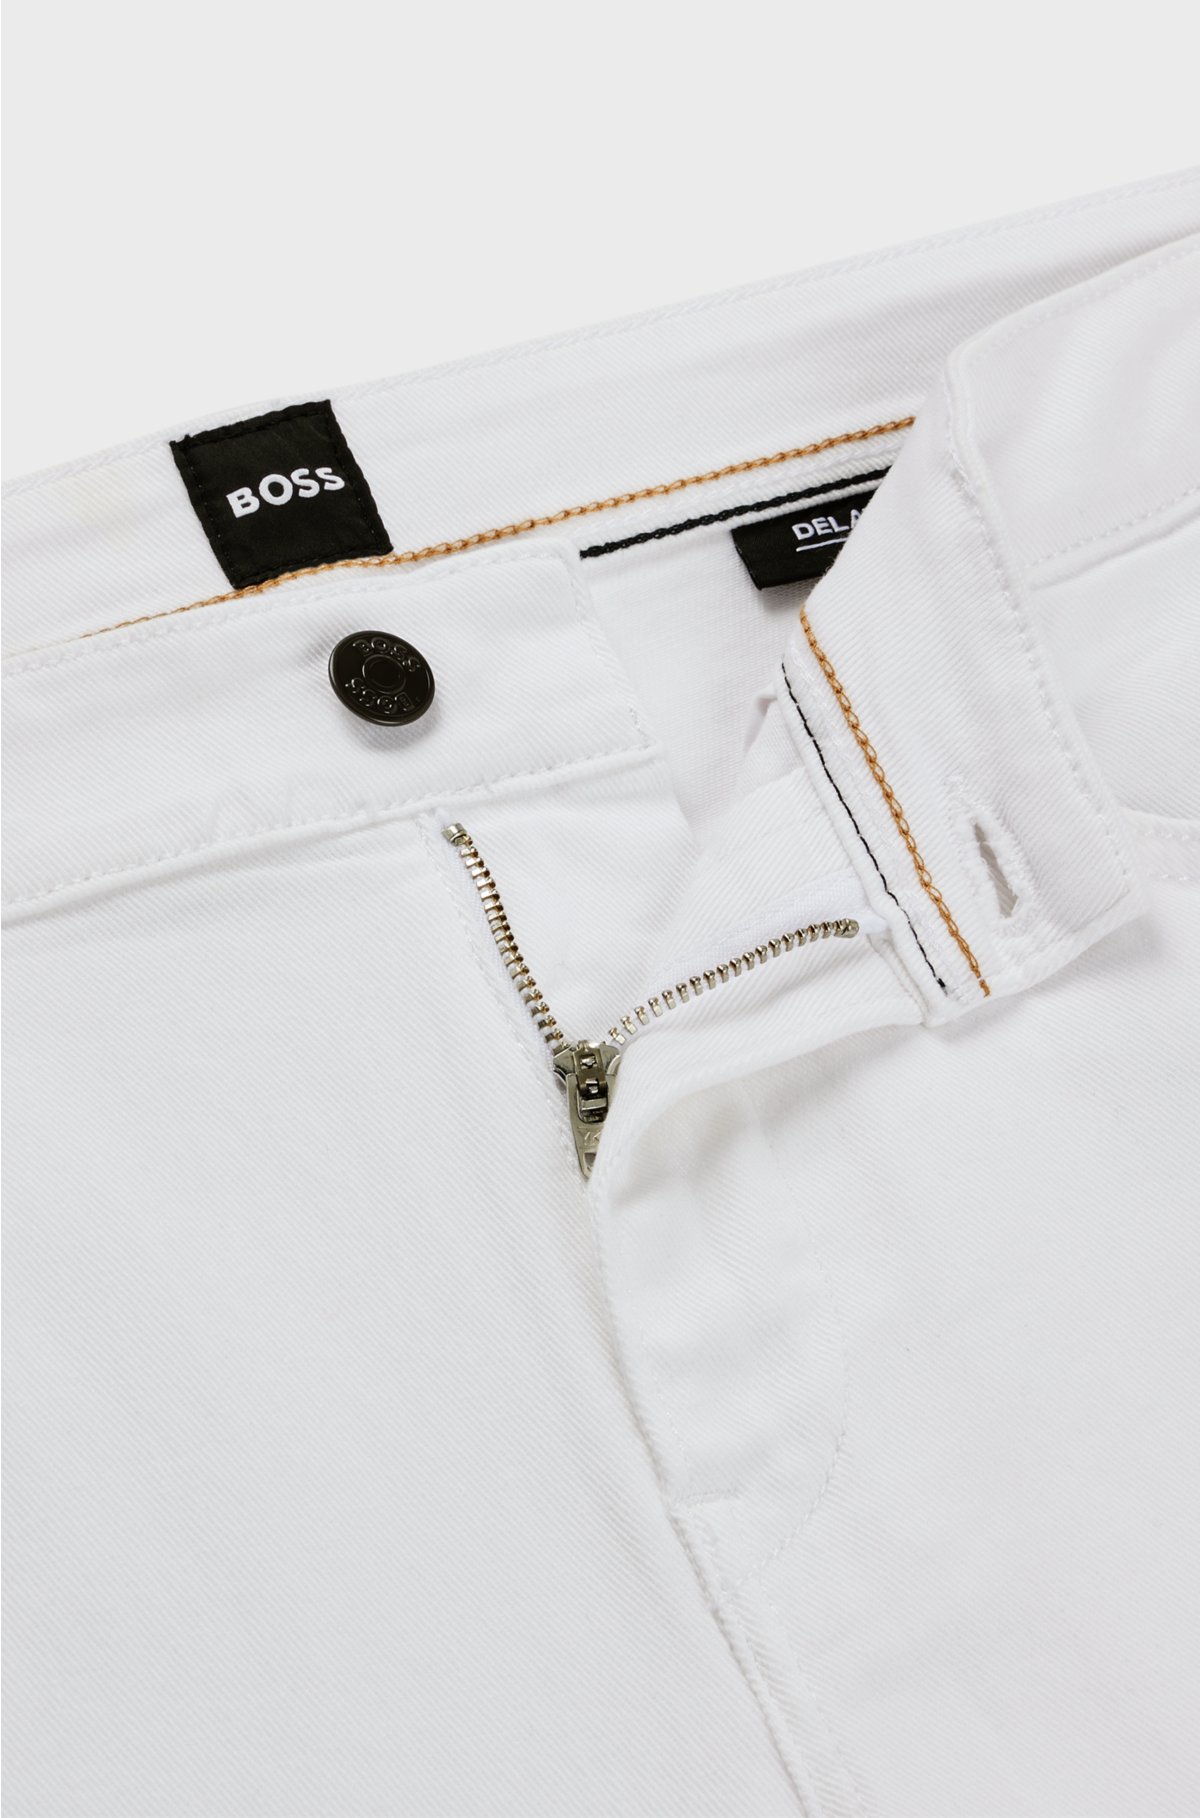 Slim-fit jeans in white cashmere-touch denim, White